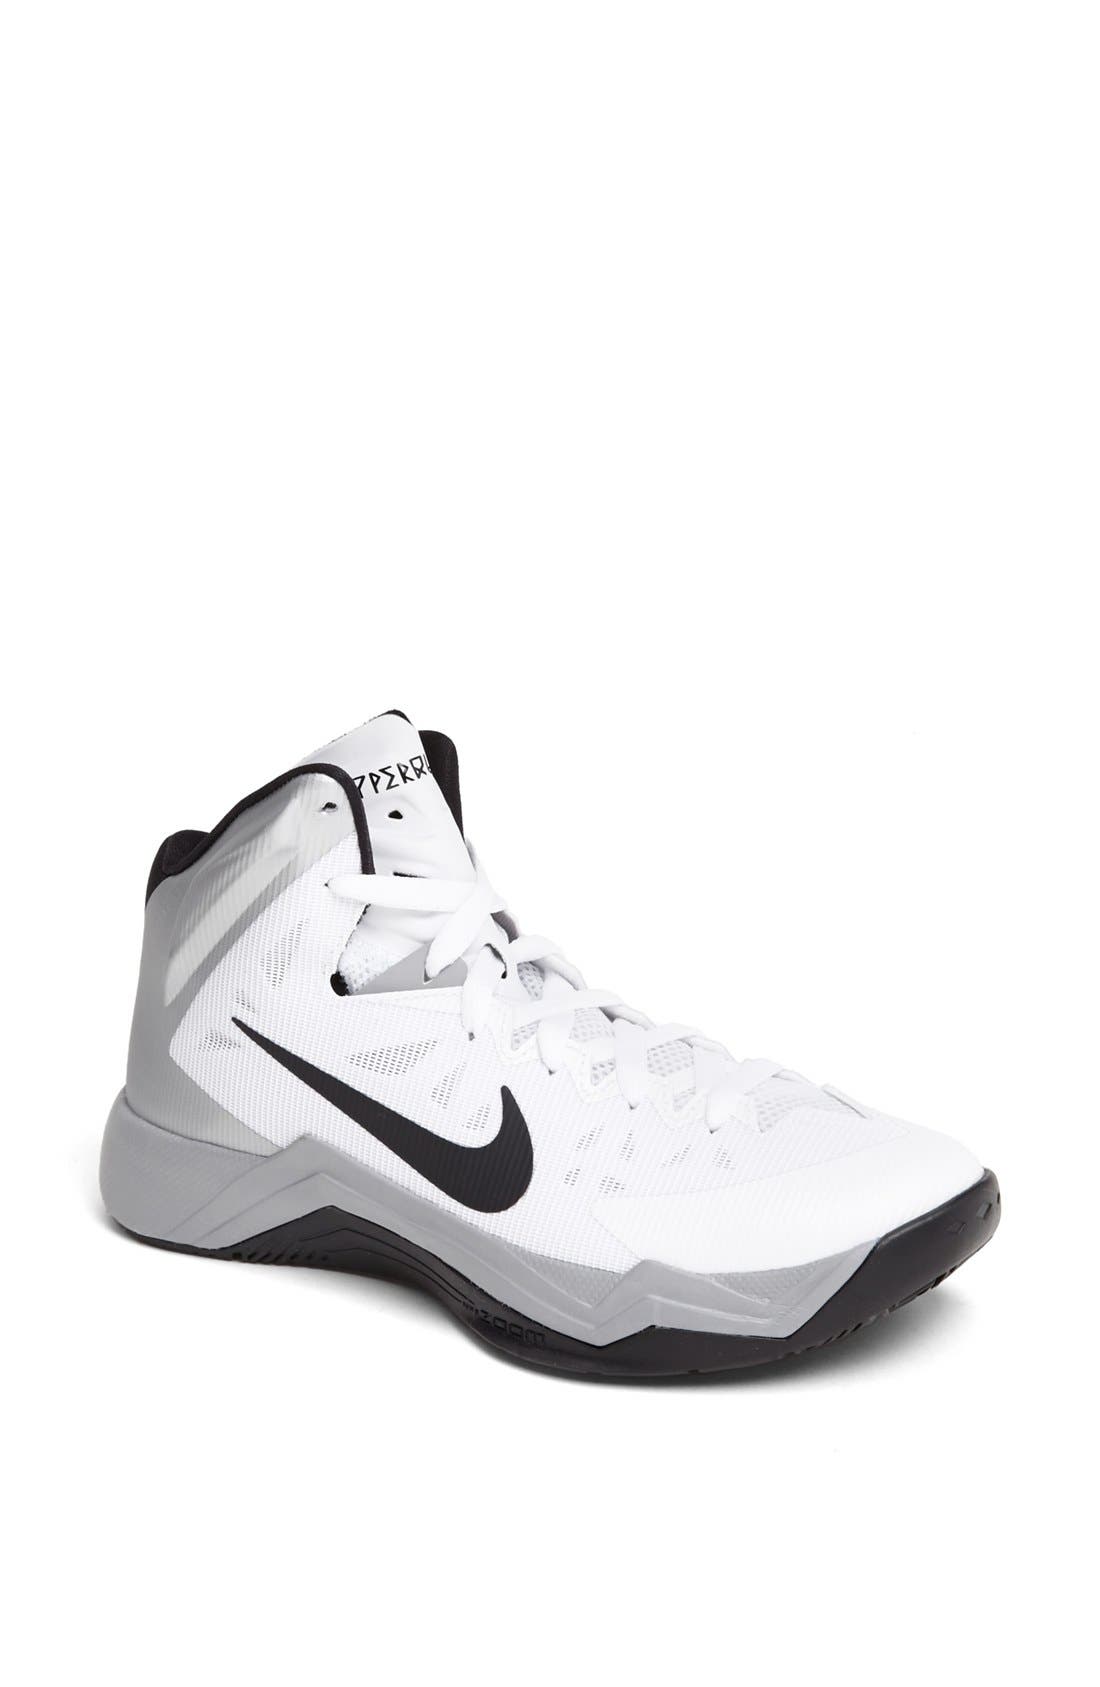 nike hyper quickness basketball shoes